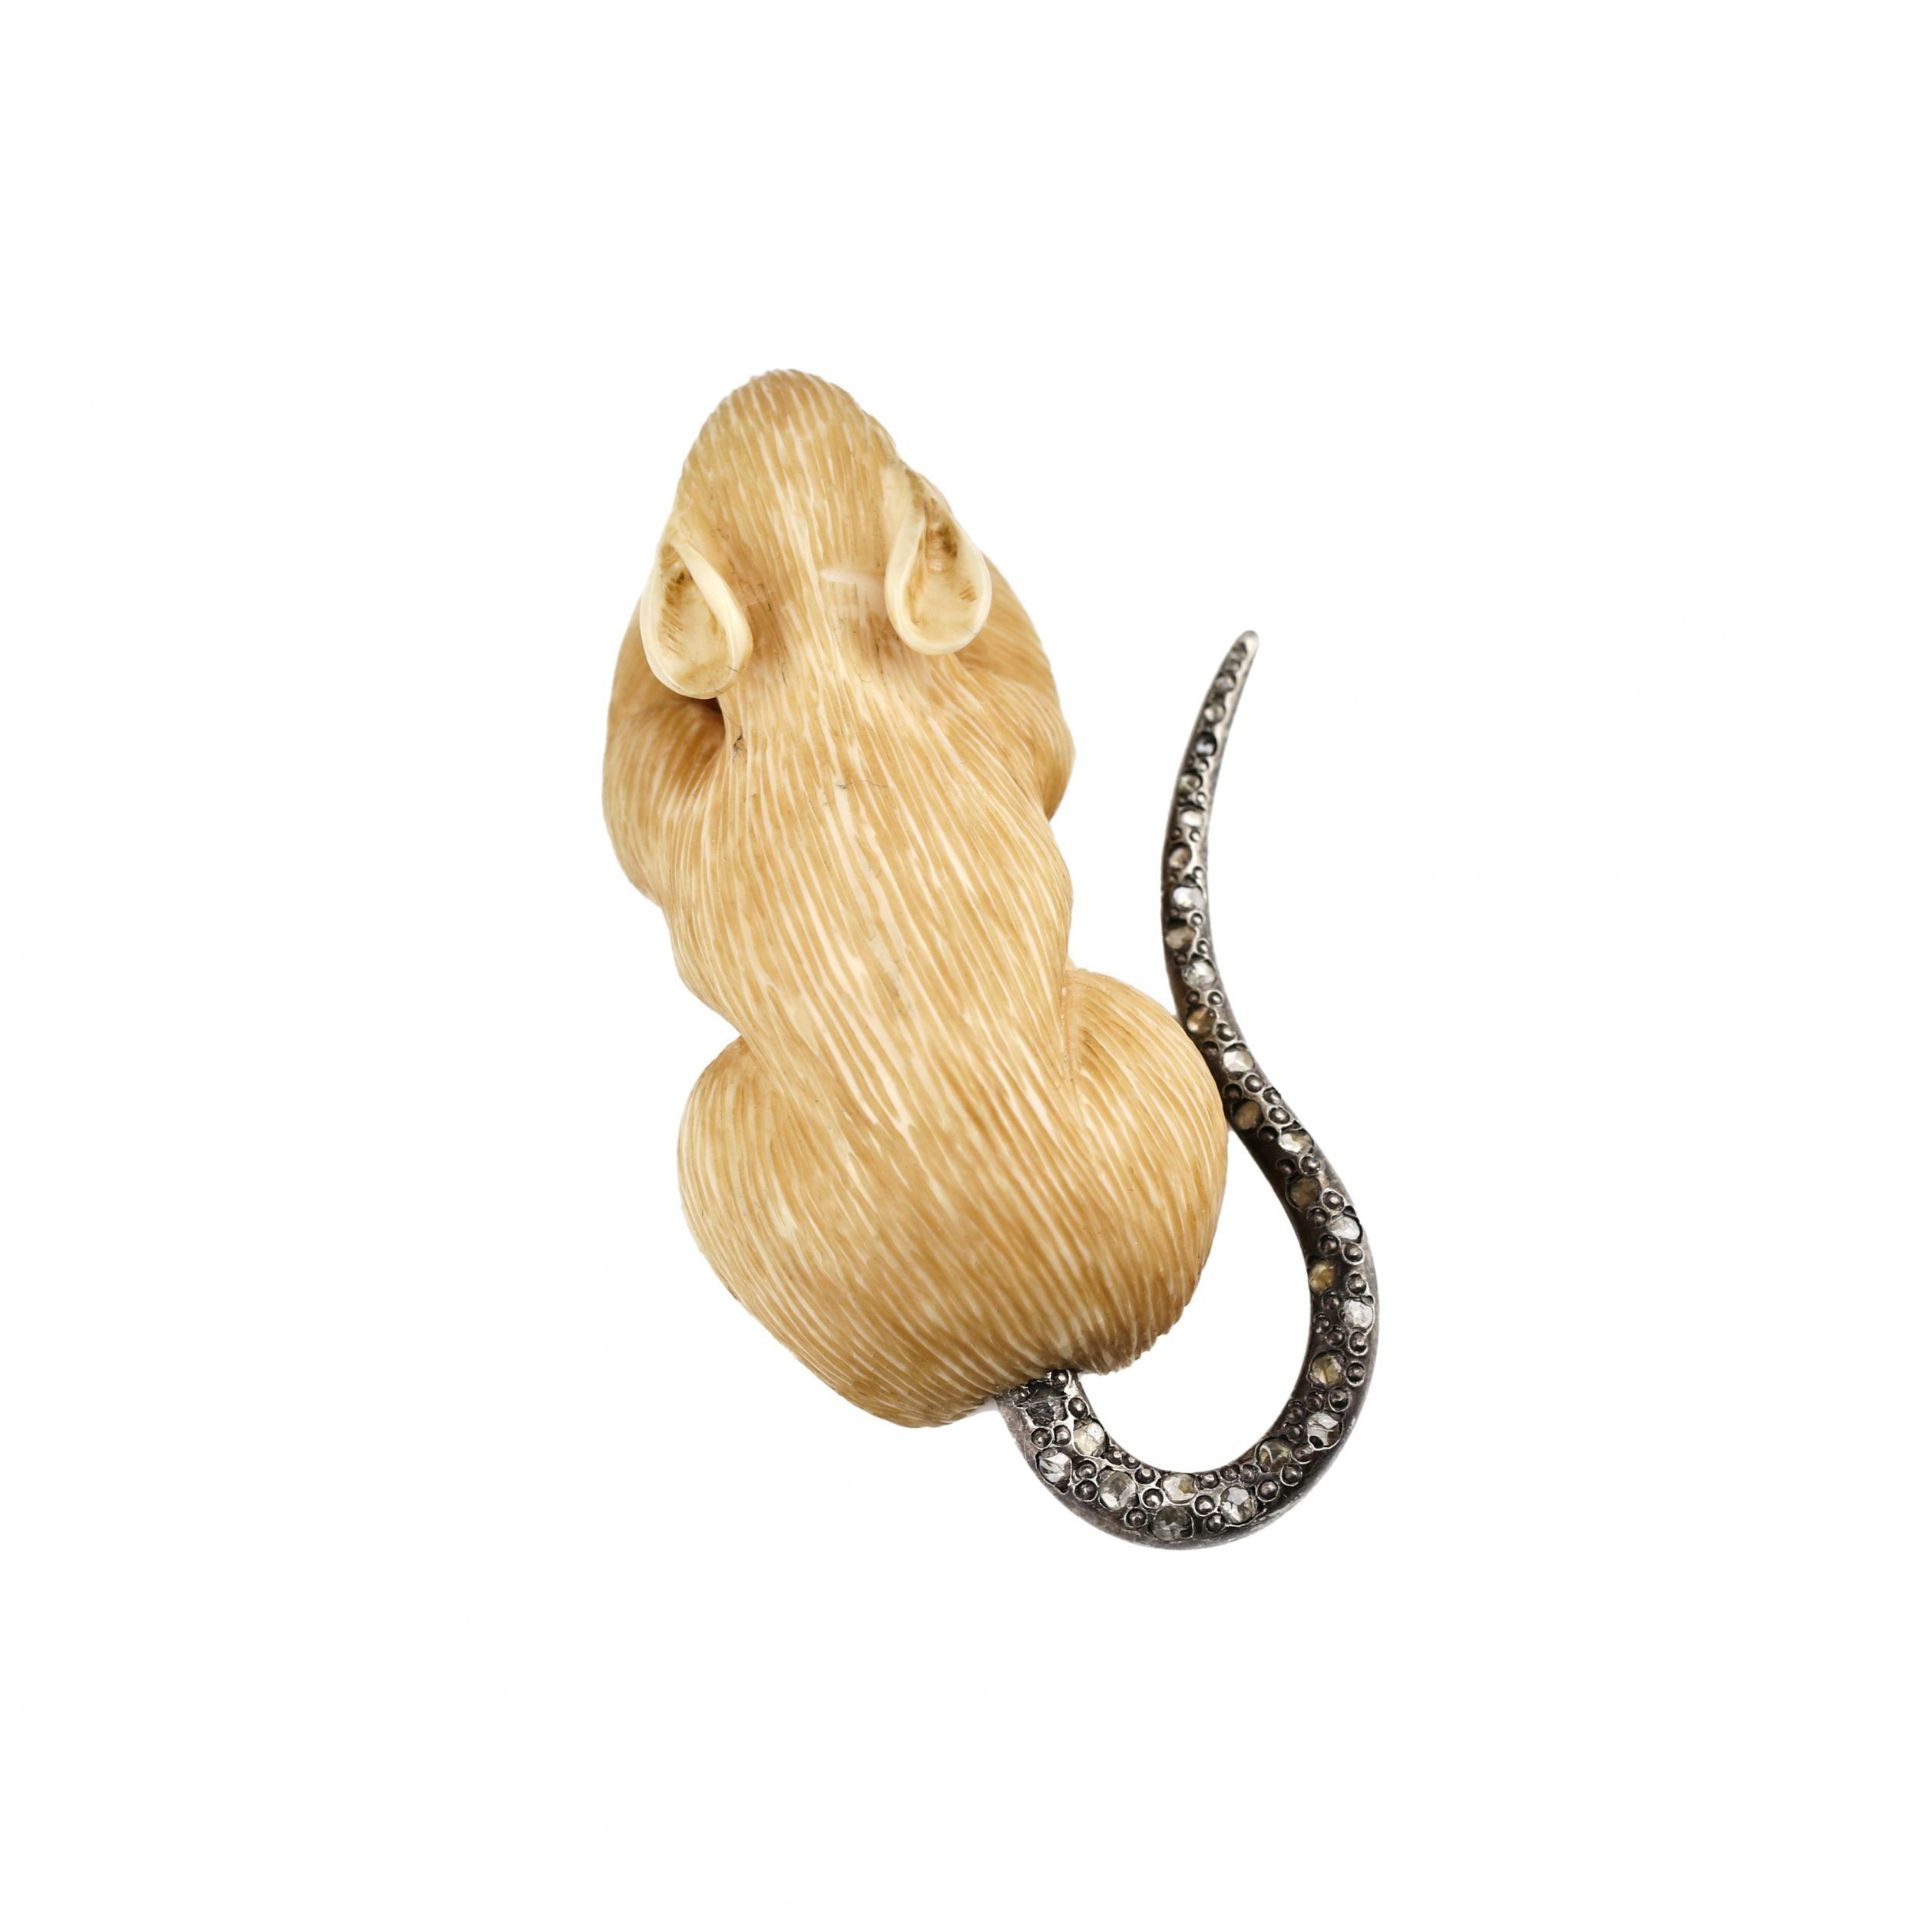 Carved mammoth tusk mouse with diamond tail. - Image 6 of 9